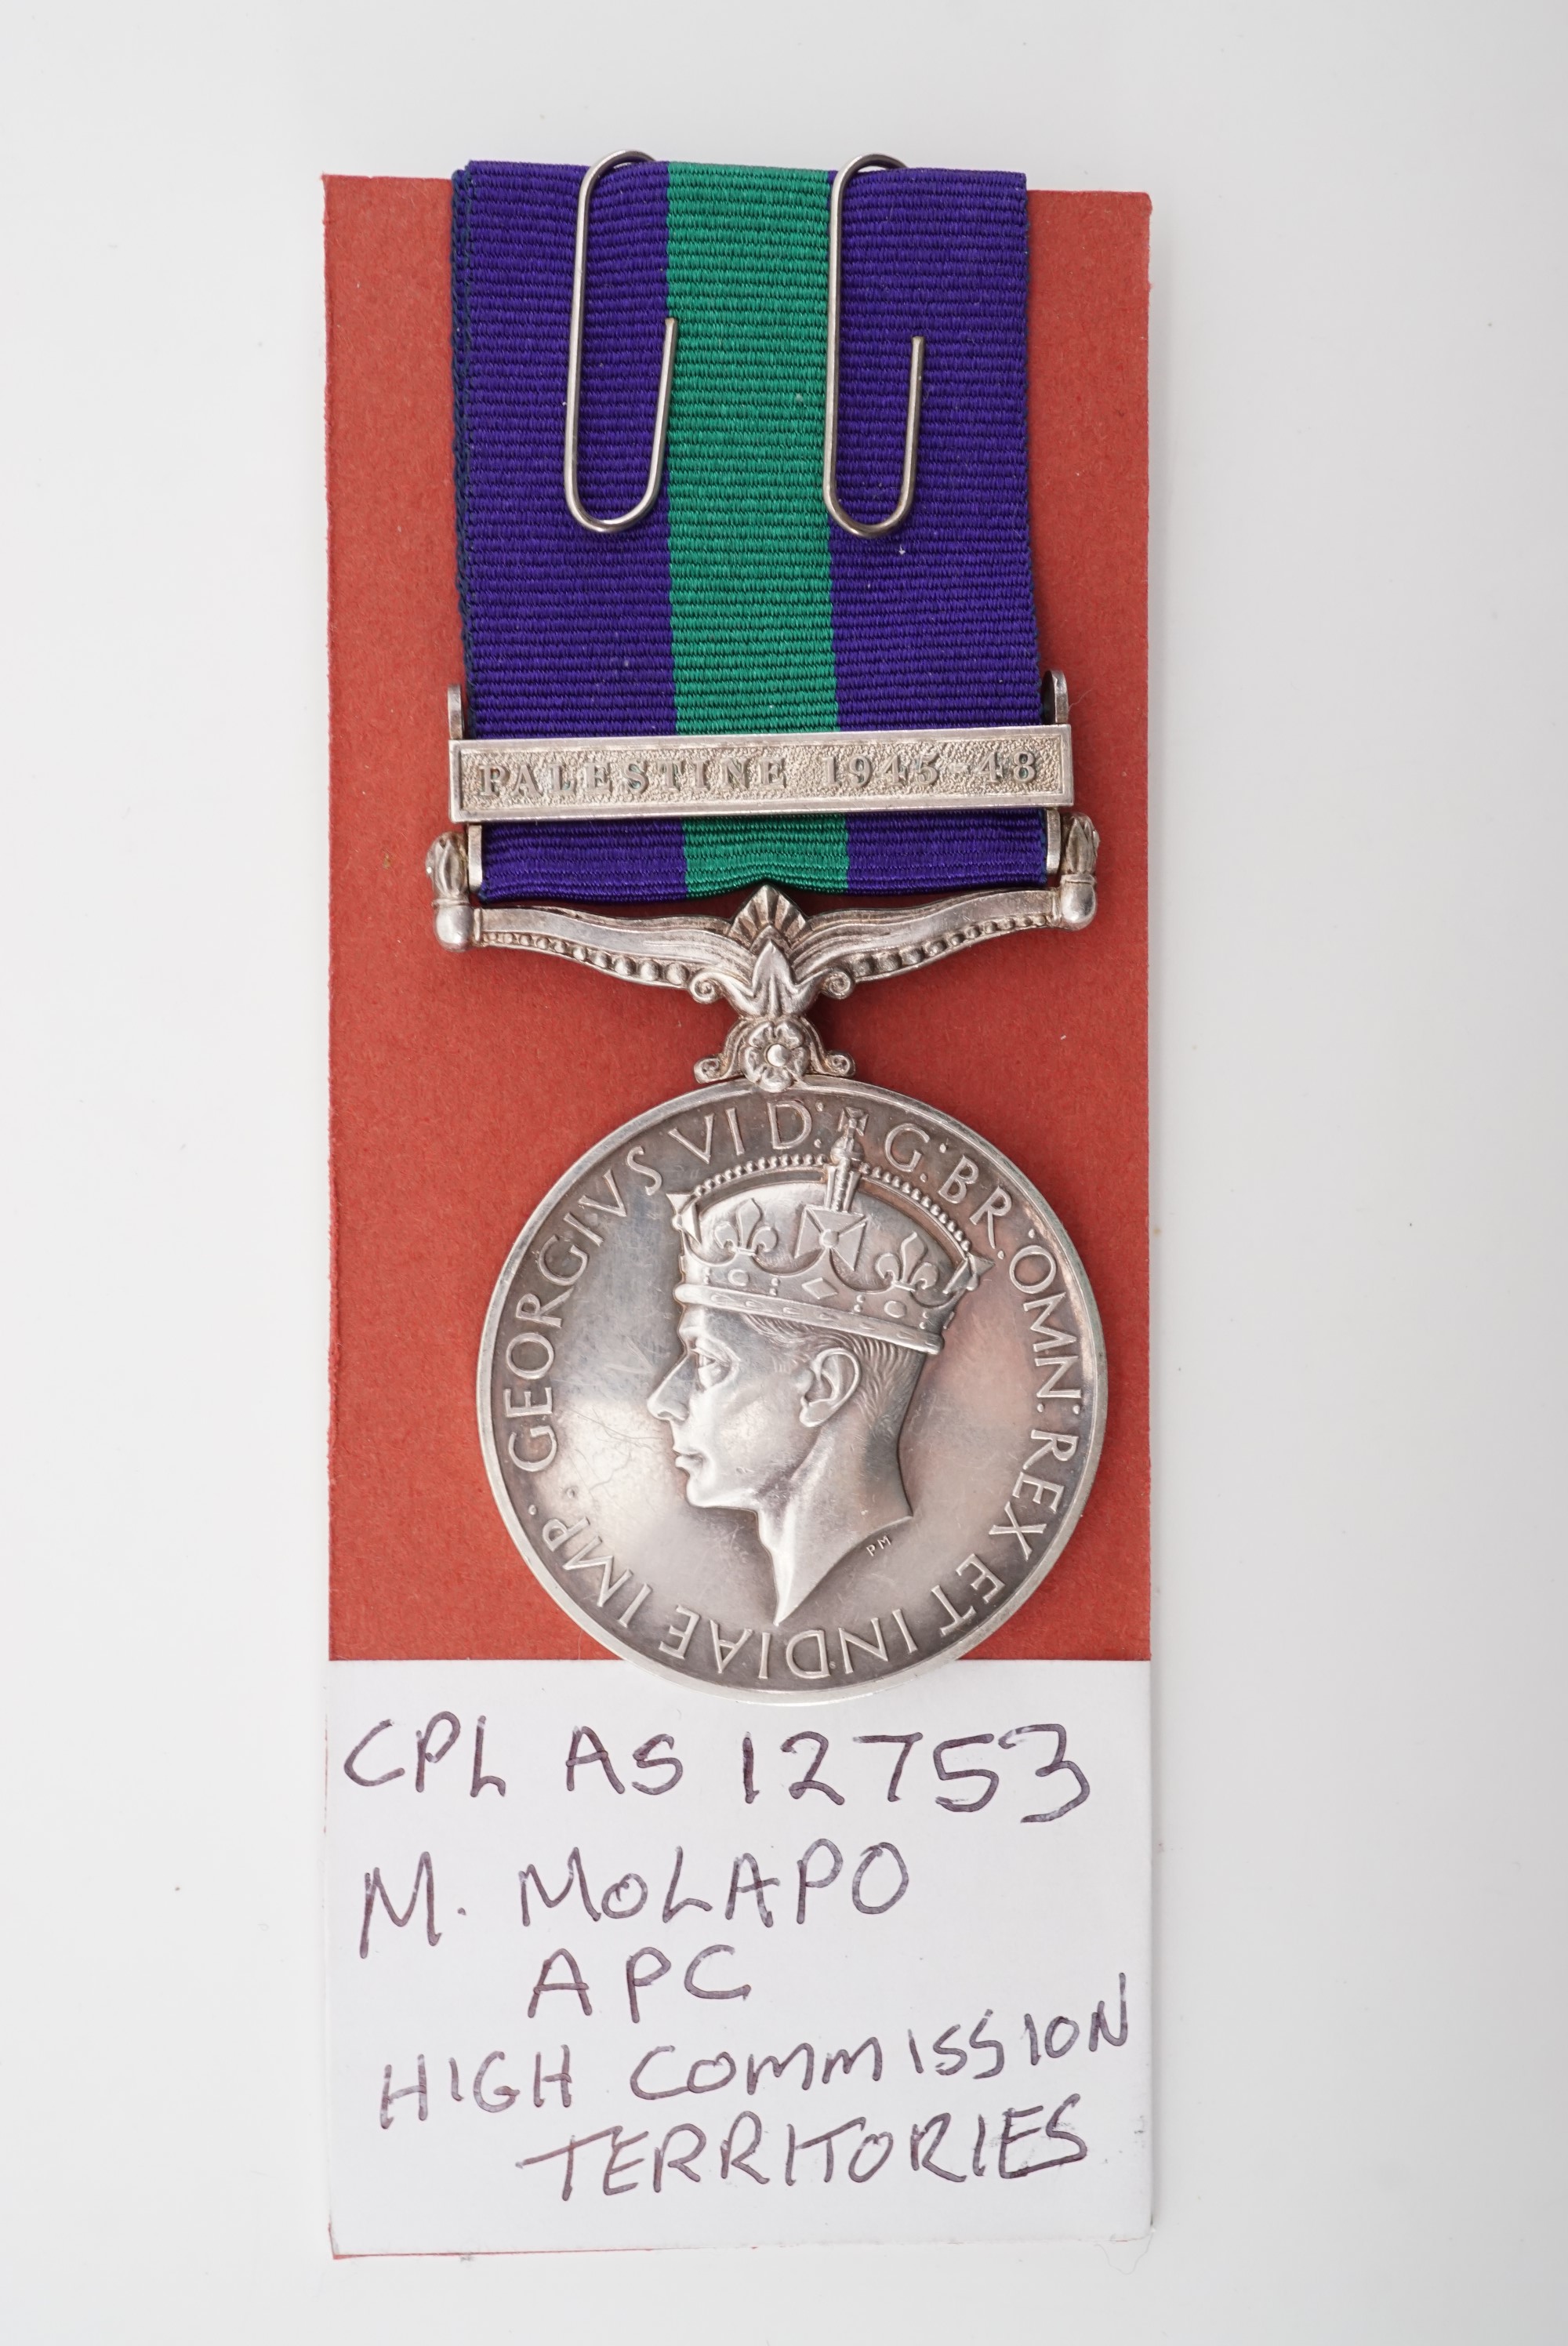 A George VI General Service Medal with Palestine 1945-48 clasp to AS 12753 Cpl M Molapo, APC